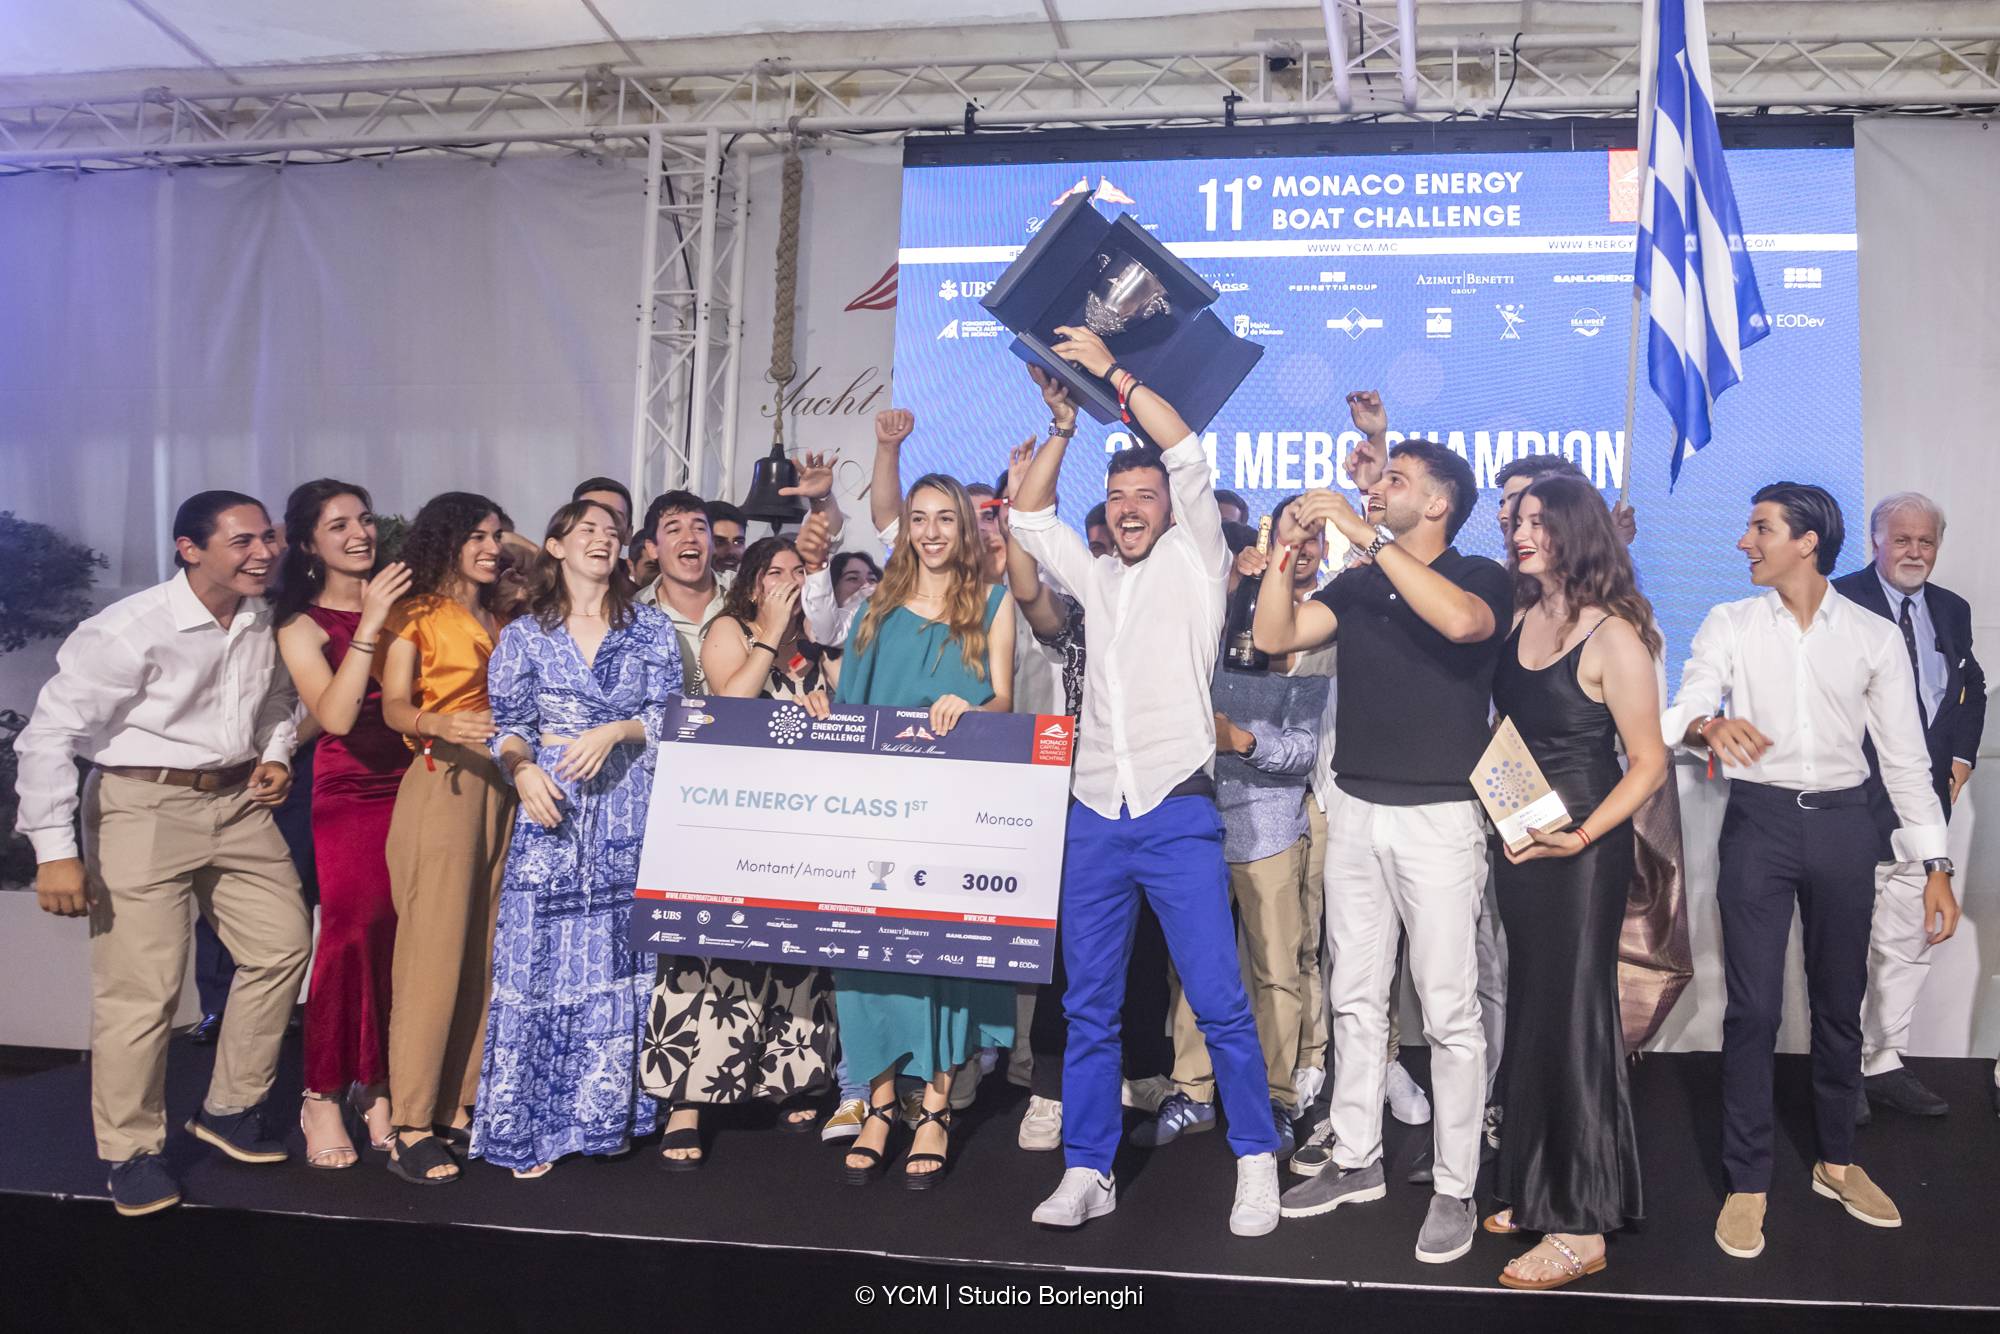 Greek Victory at the 11th Monaco Energy Boat Challenge